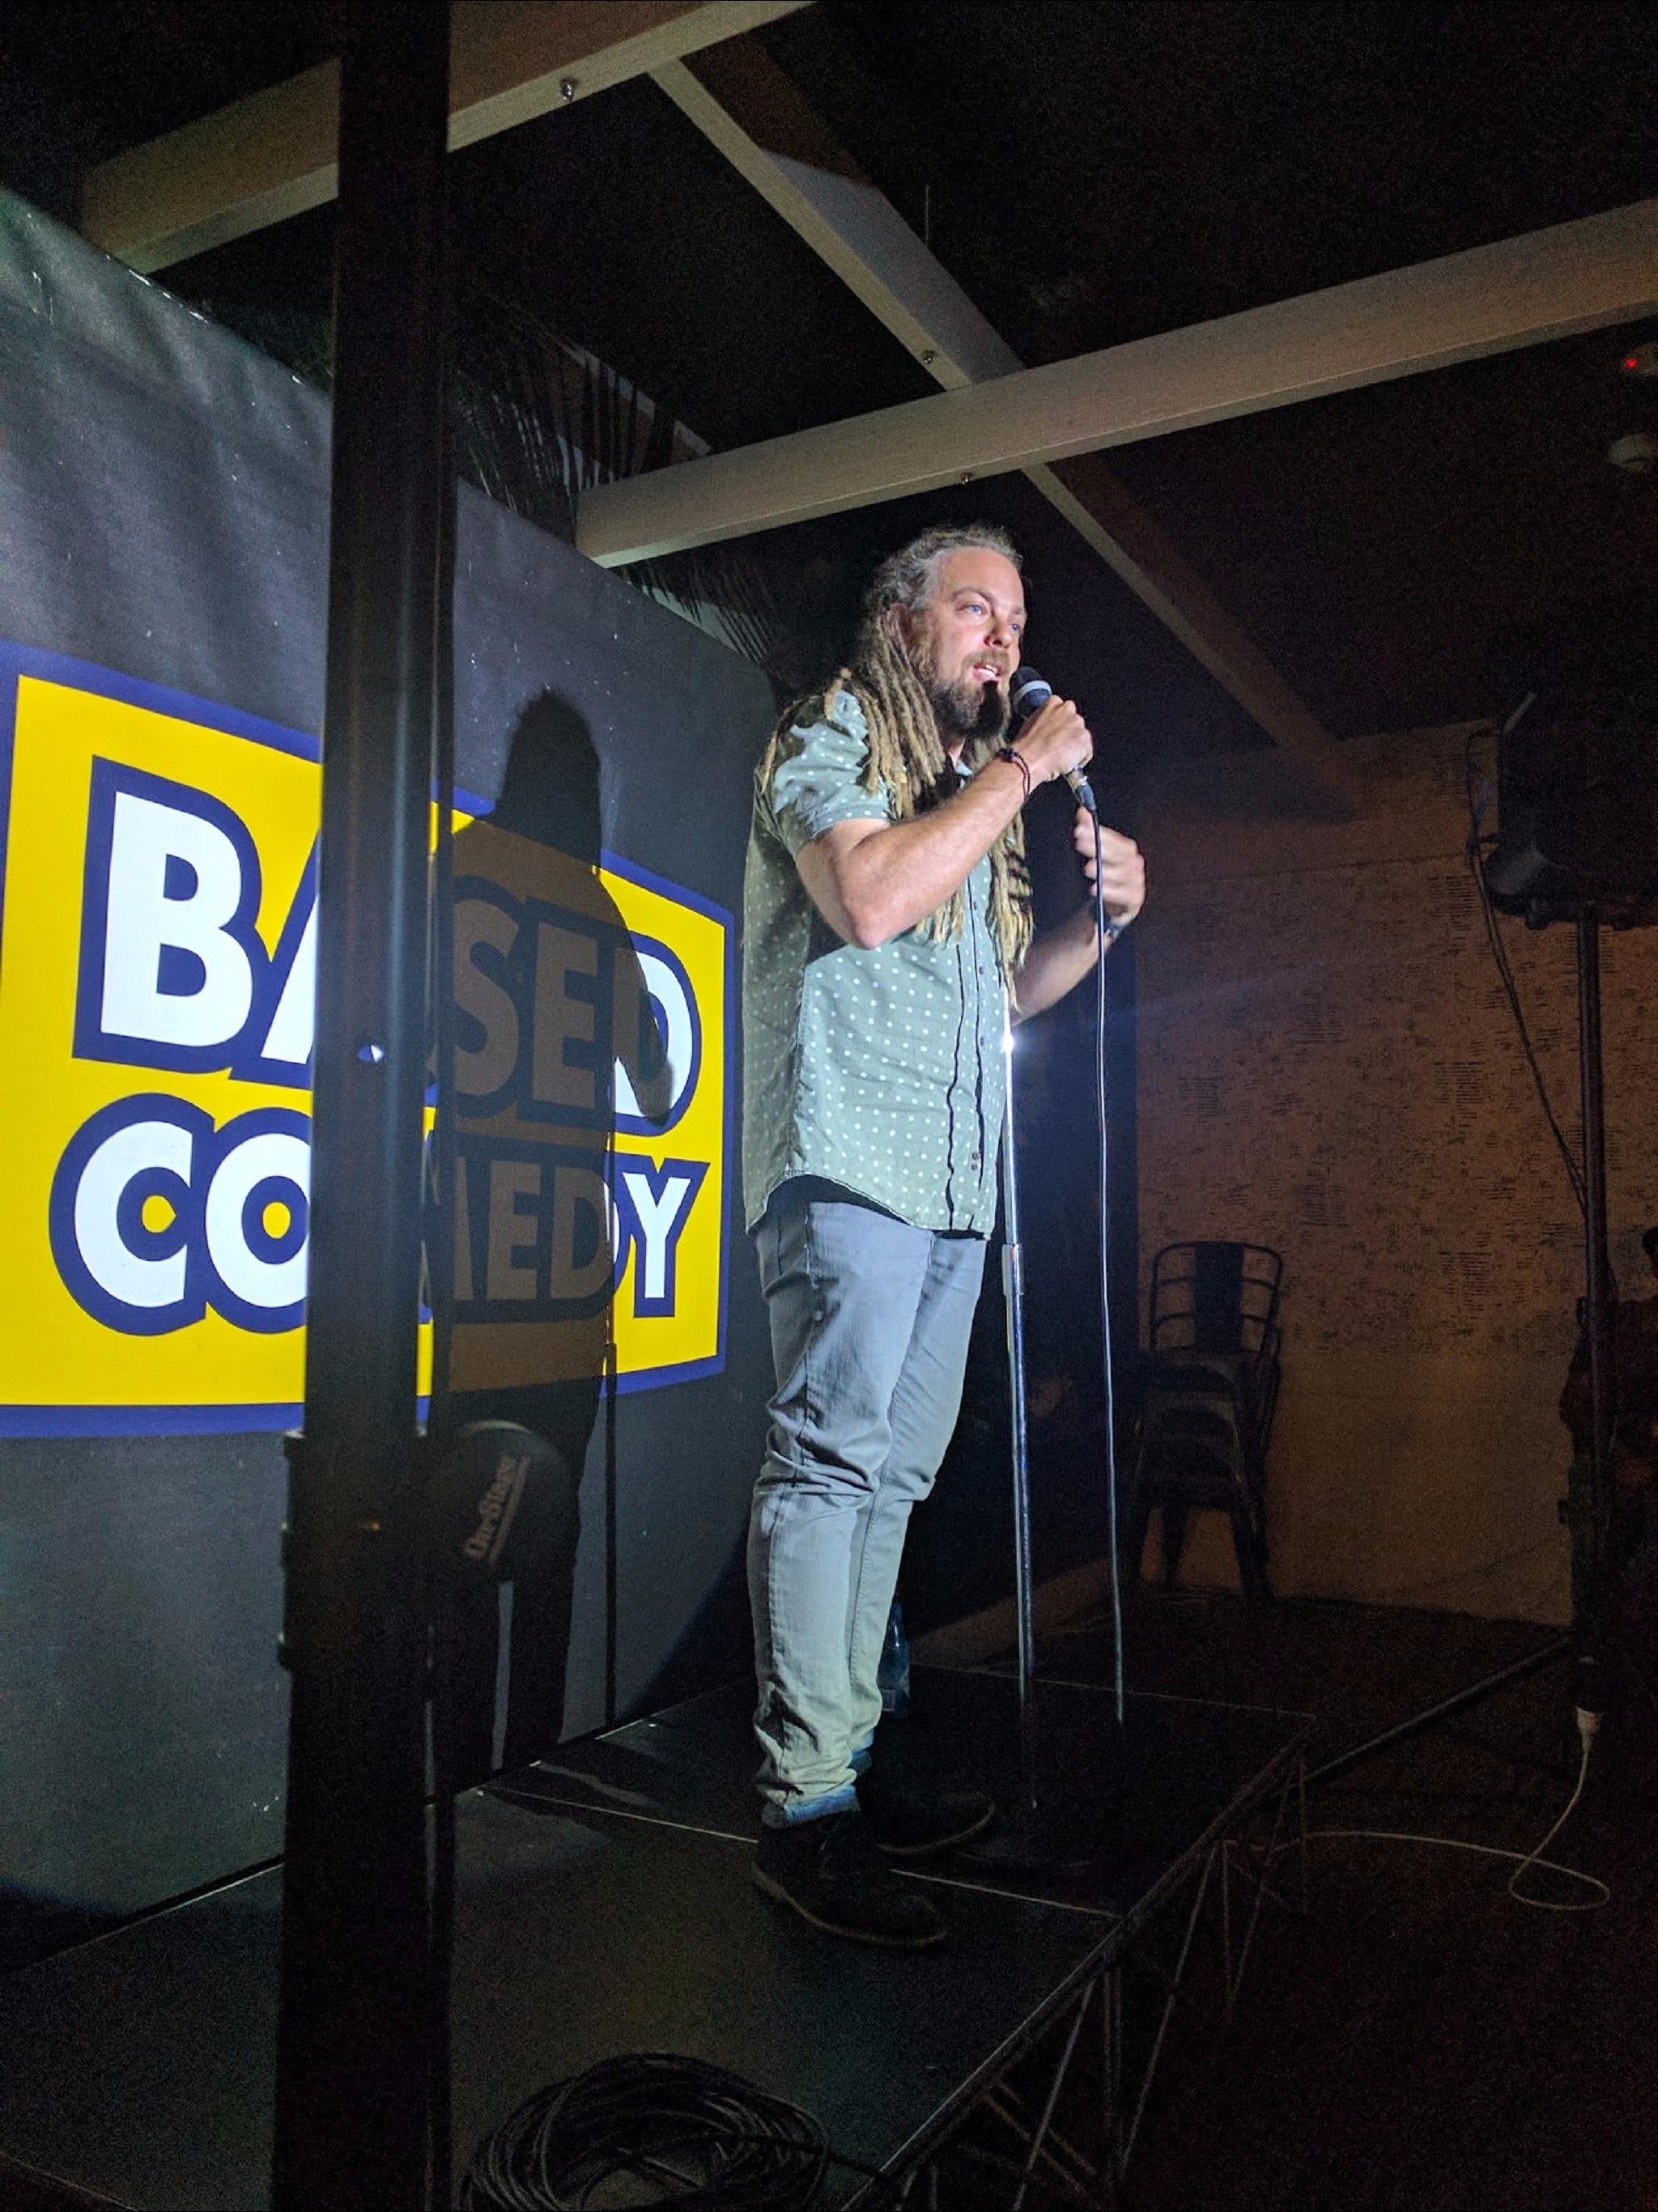 Based Comedy at The Palm Beach Hotel - Pubs Sydney